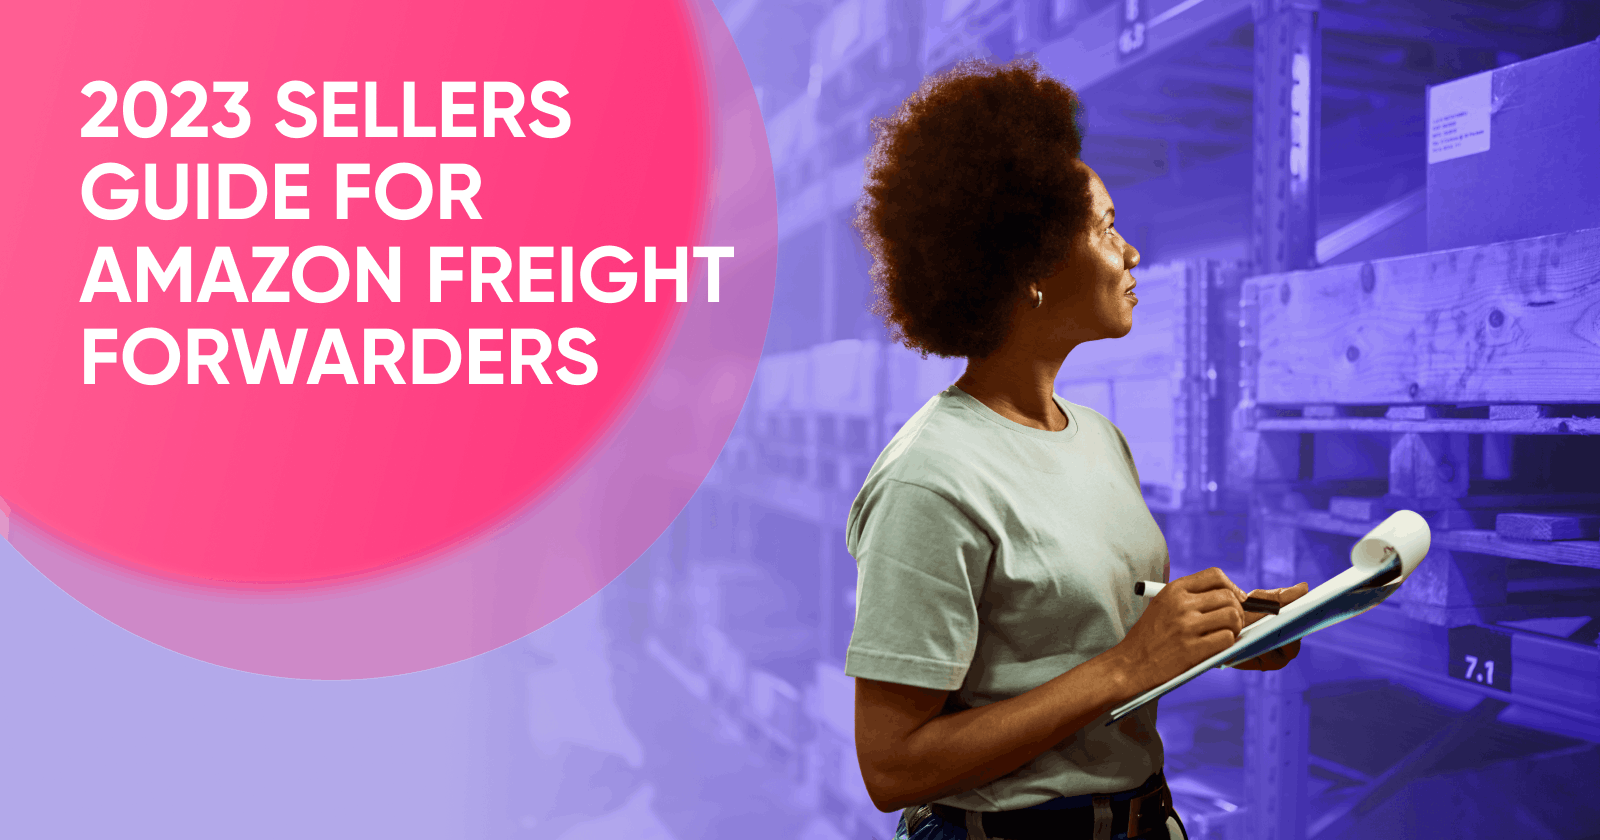 The Ultimate Amazon Sellers Guide: Amazon Freight Forwarders